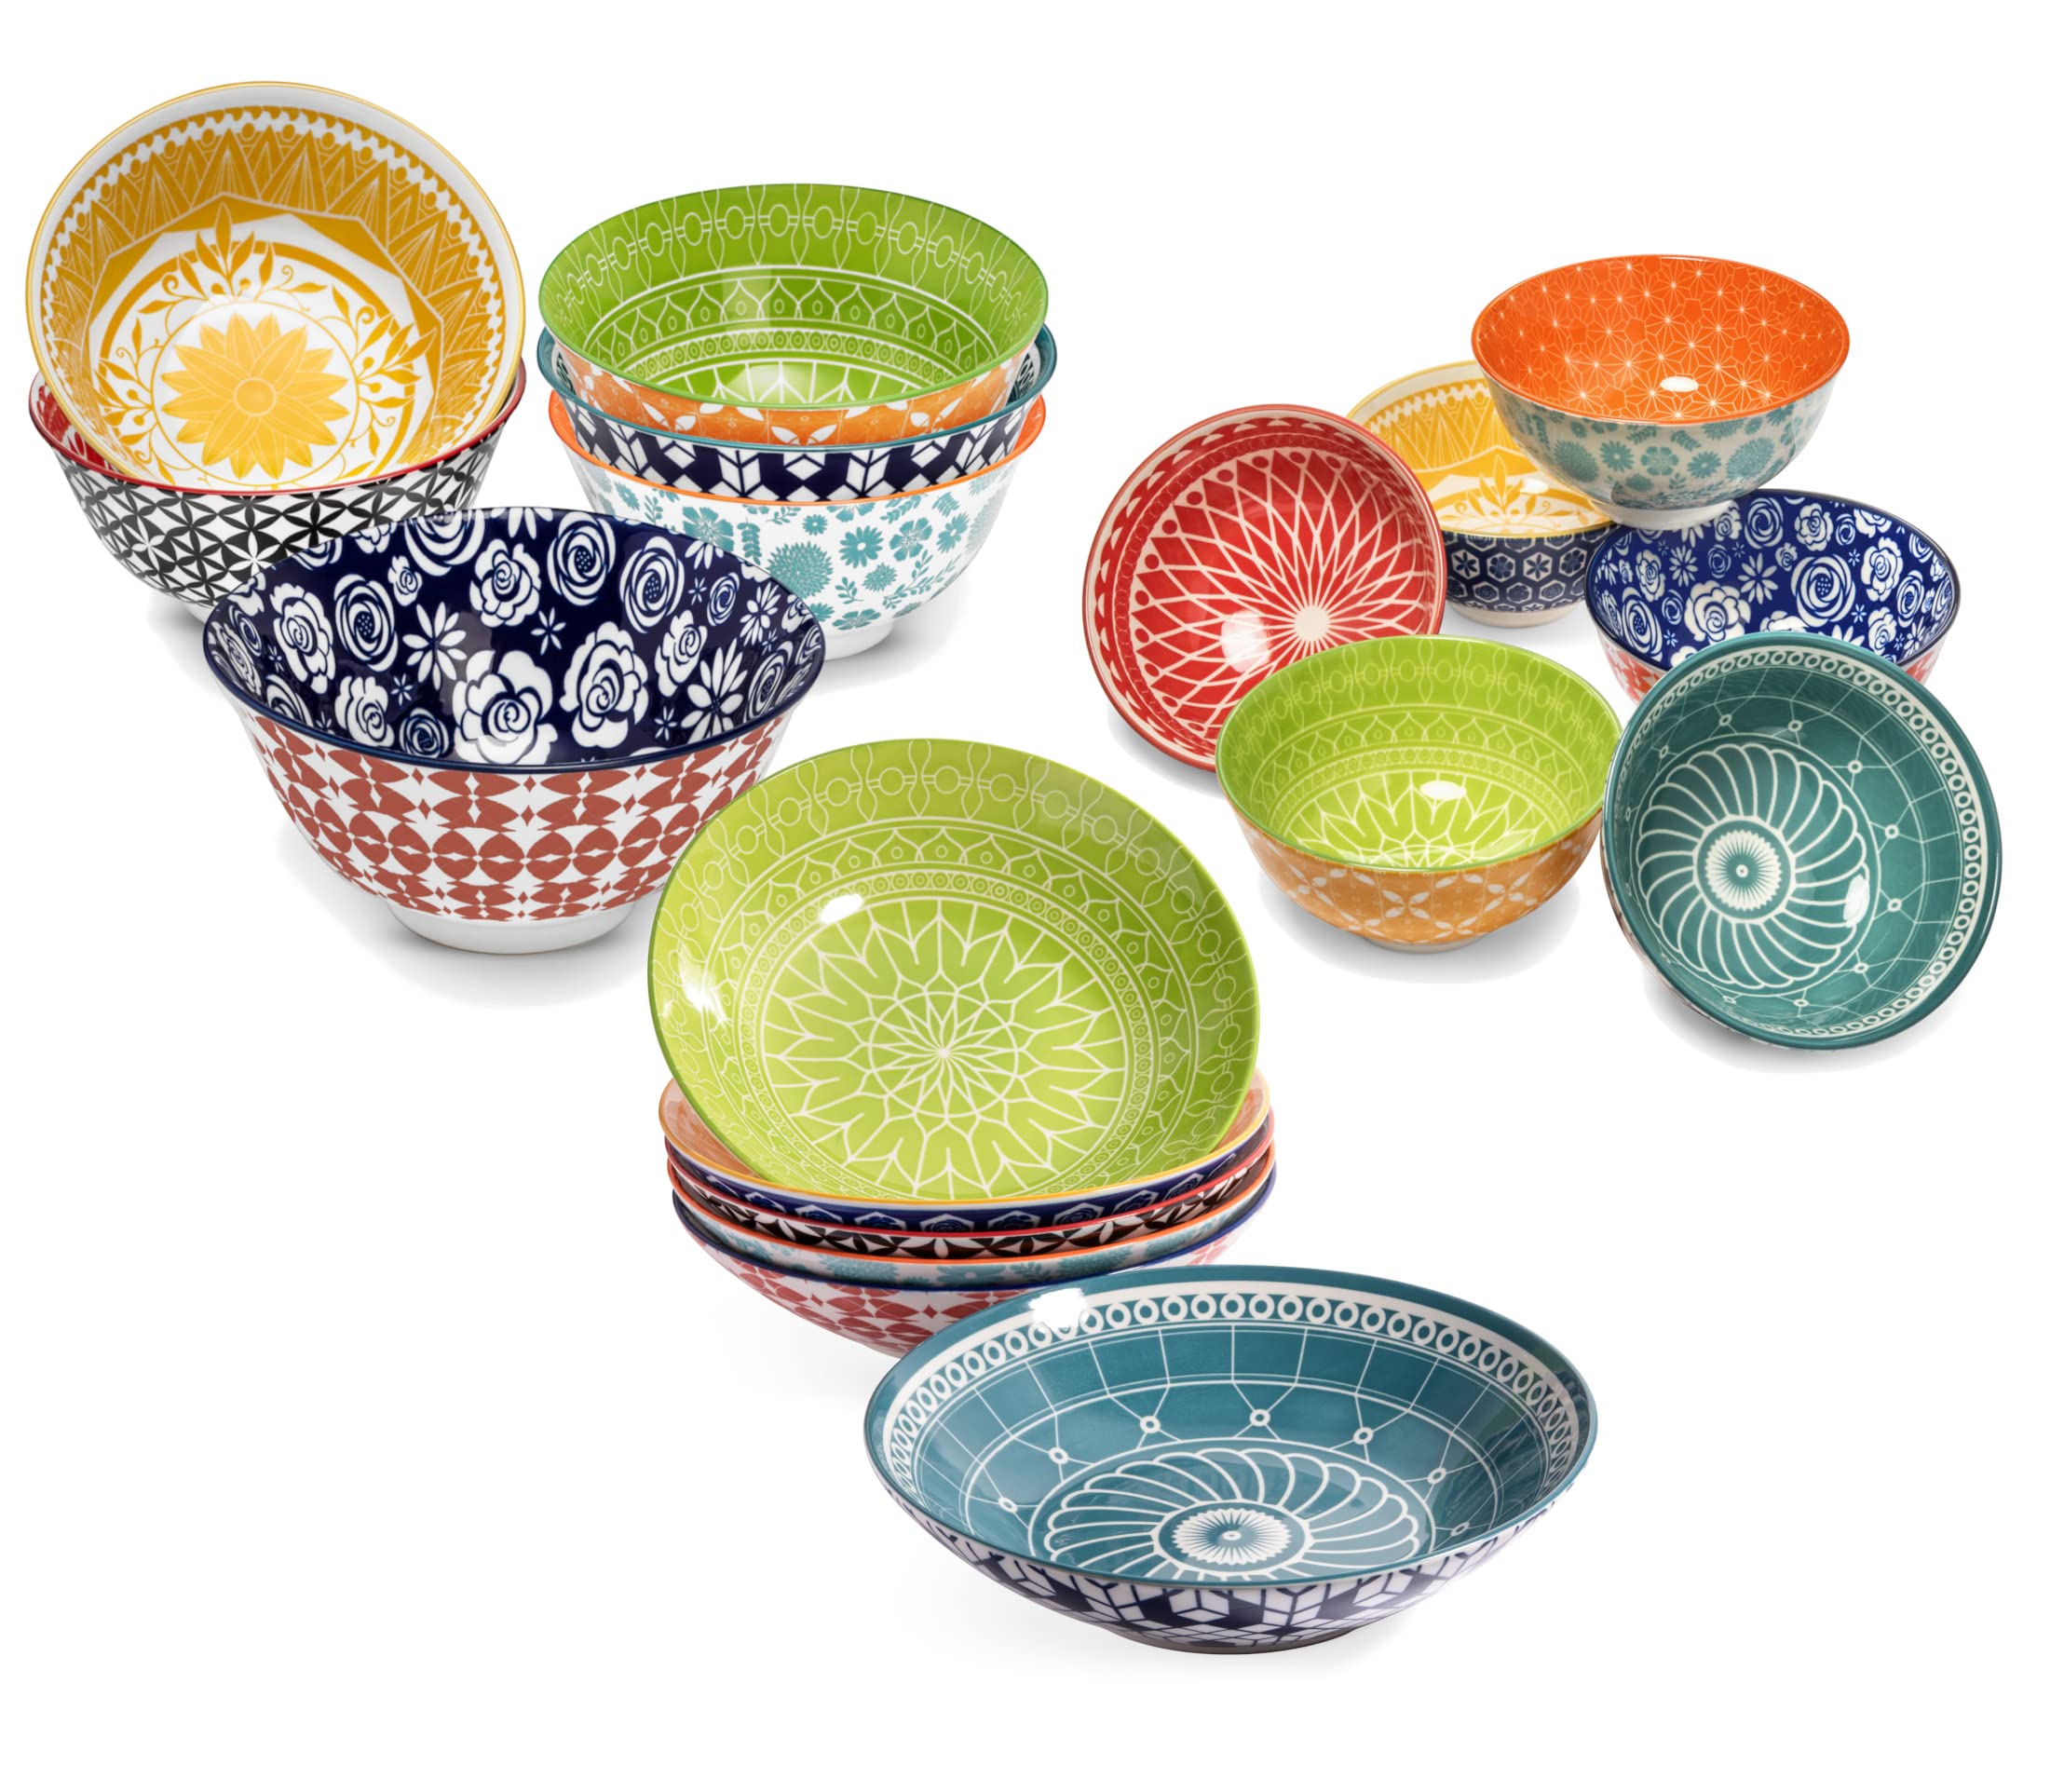 Annovero Cereal Bowls, Dessert Bowls, Pasta Bowls. Cute and Colorful Porcelain Dishes for Kitchen, Microwave and Oven Safe. Bundle